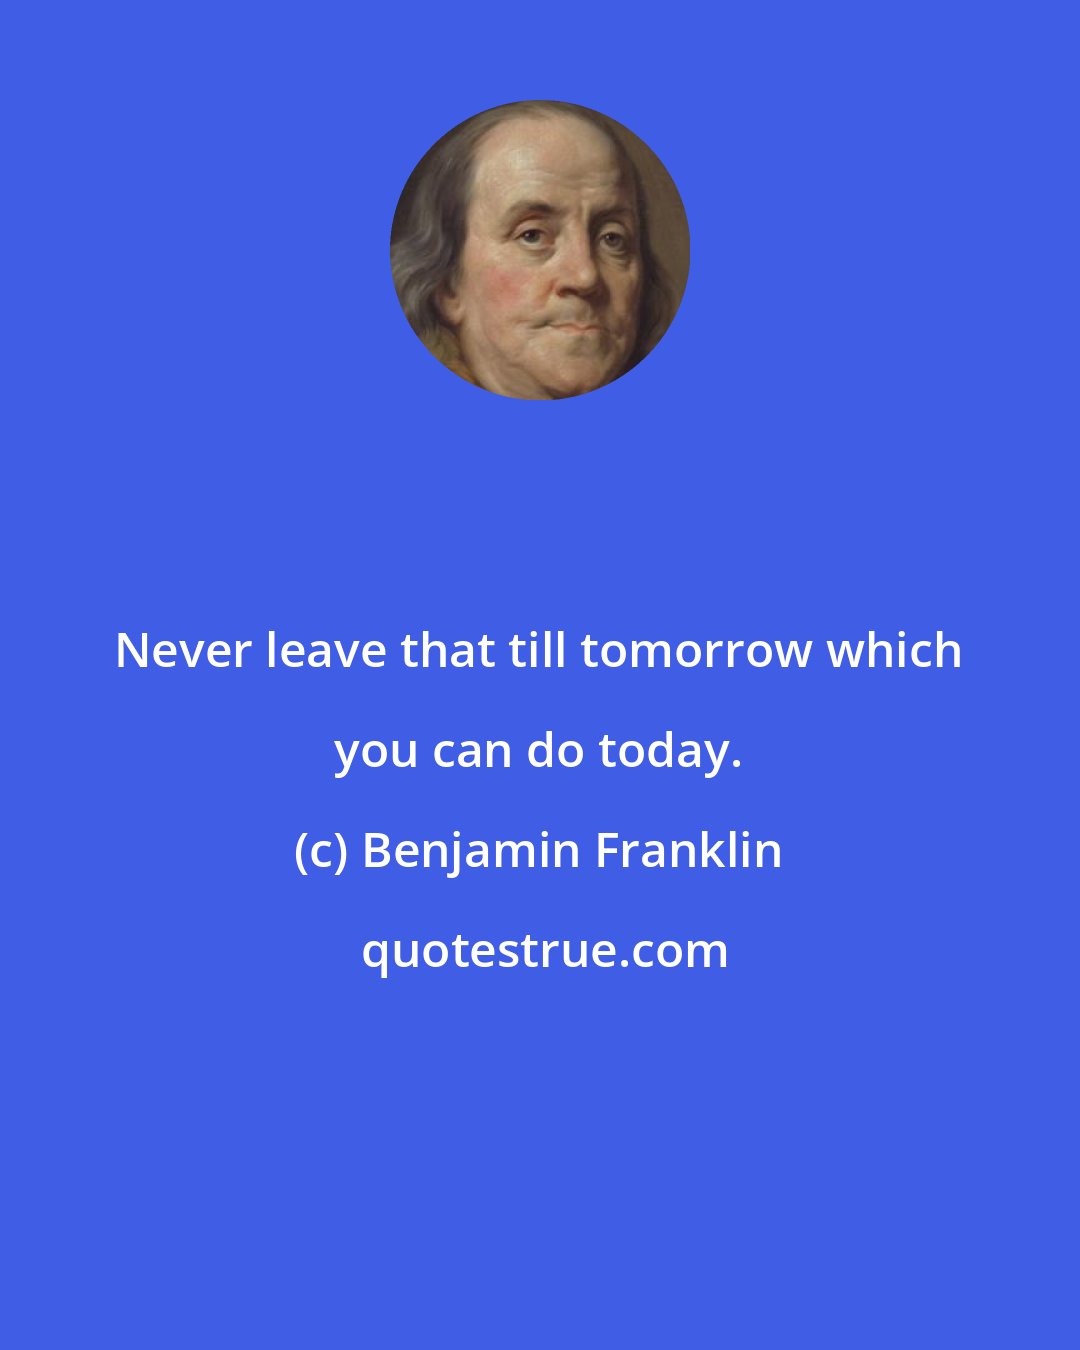 Benjamin Franklin: Never leave that till tomorrow which you can do today.